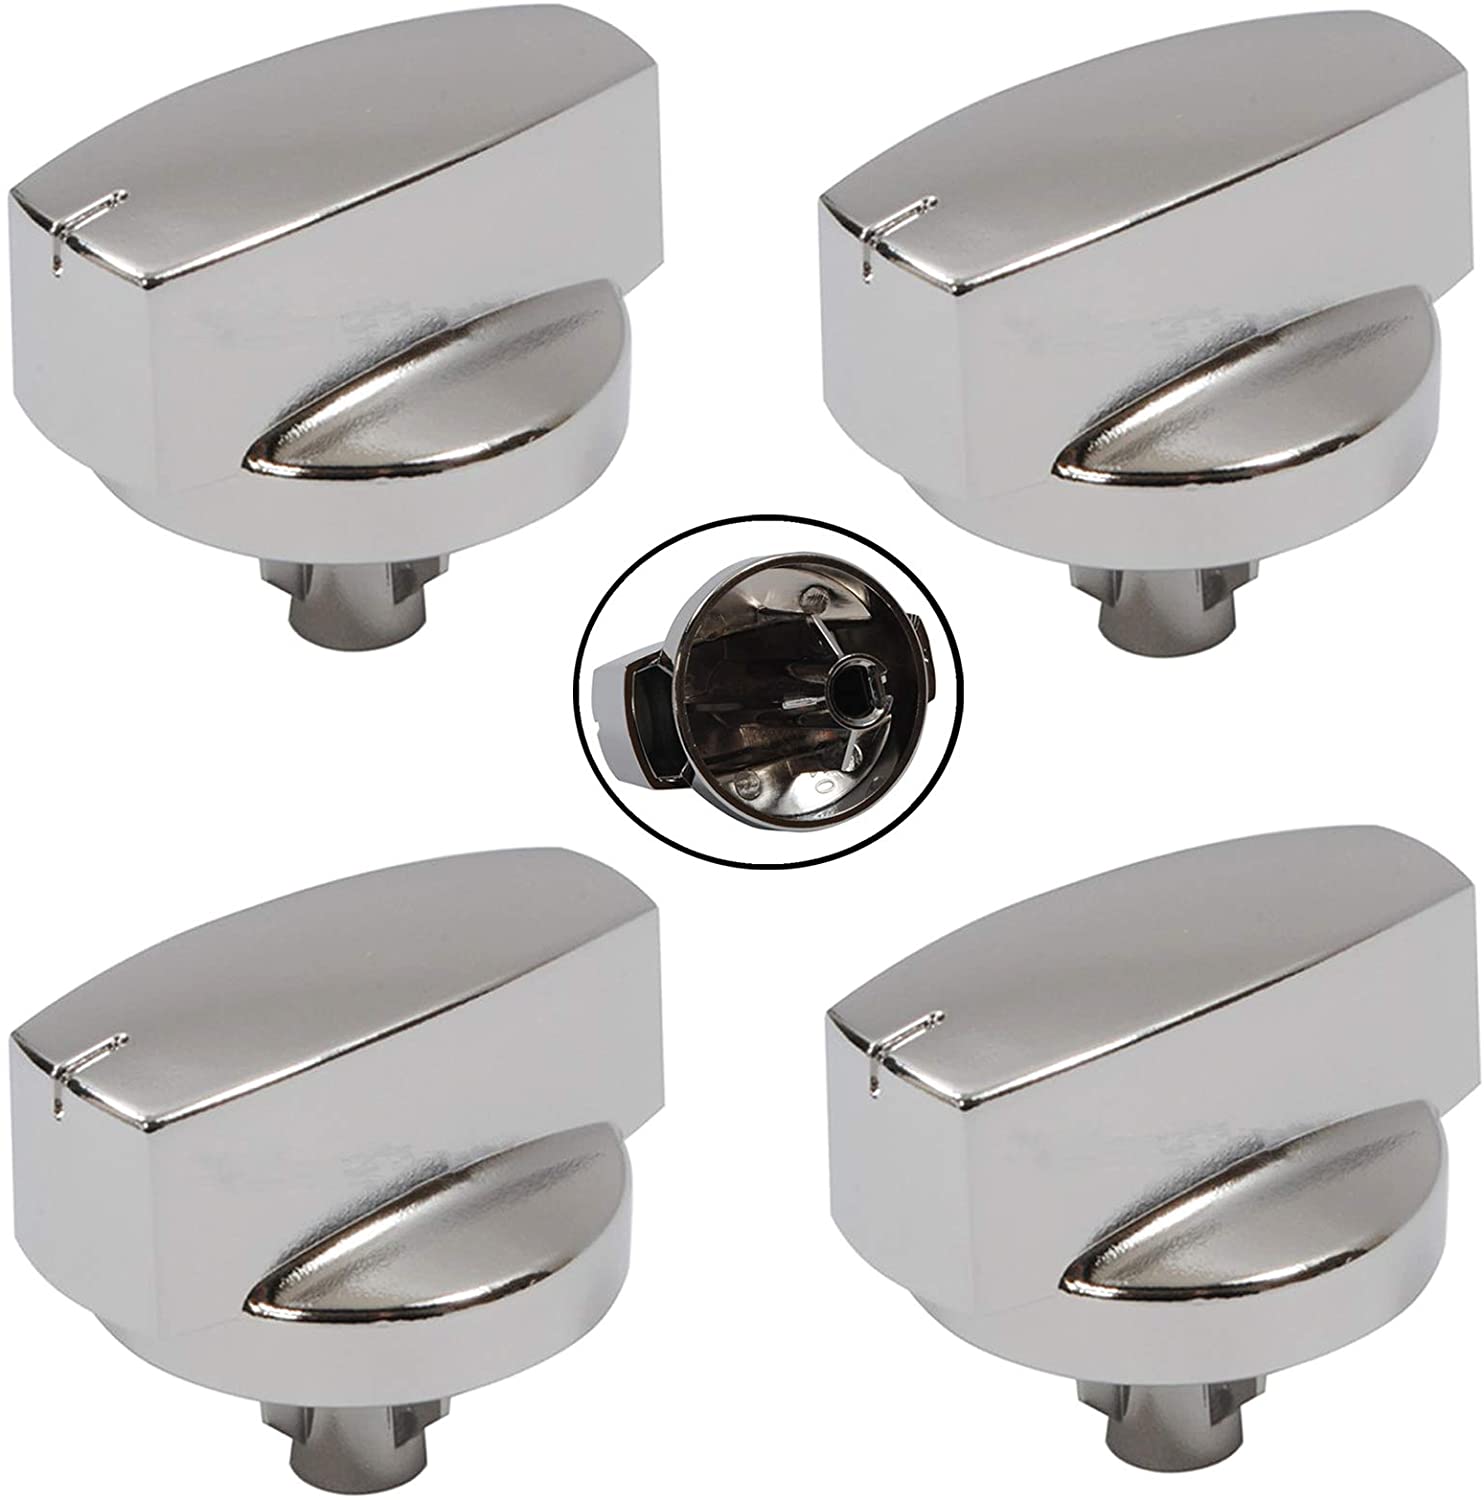 STOVES Oven Cooker Knob Function Control Switch 444445412 (Silver/Chrome) Pack of 4